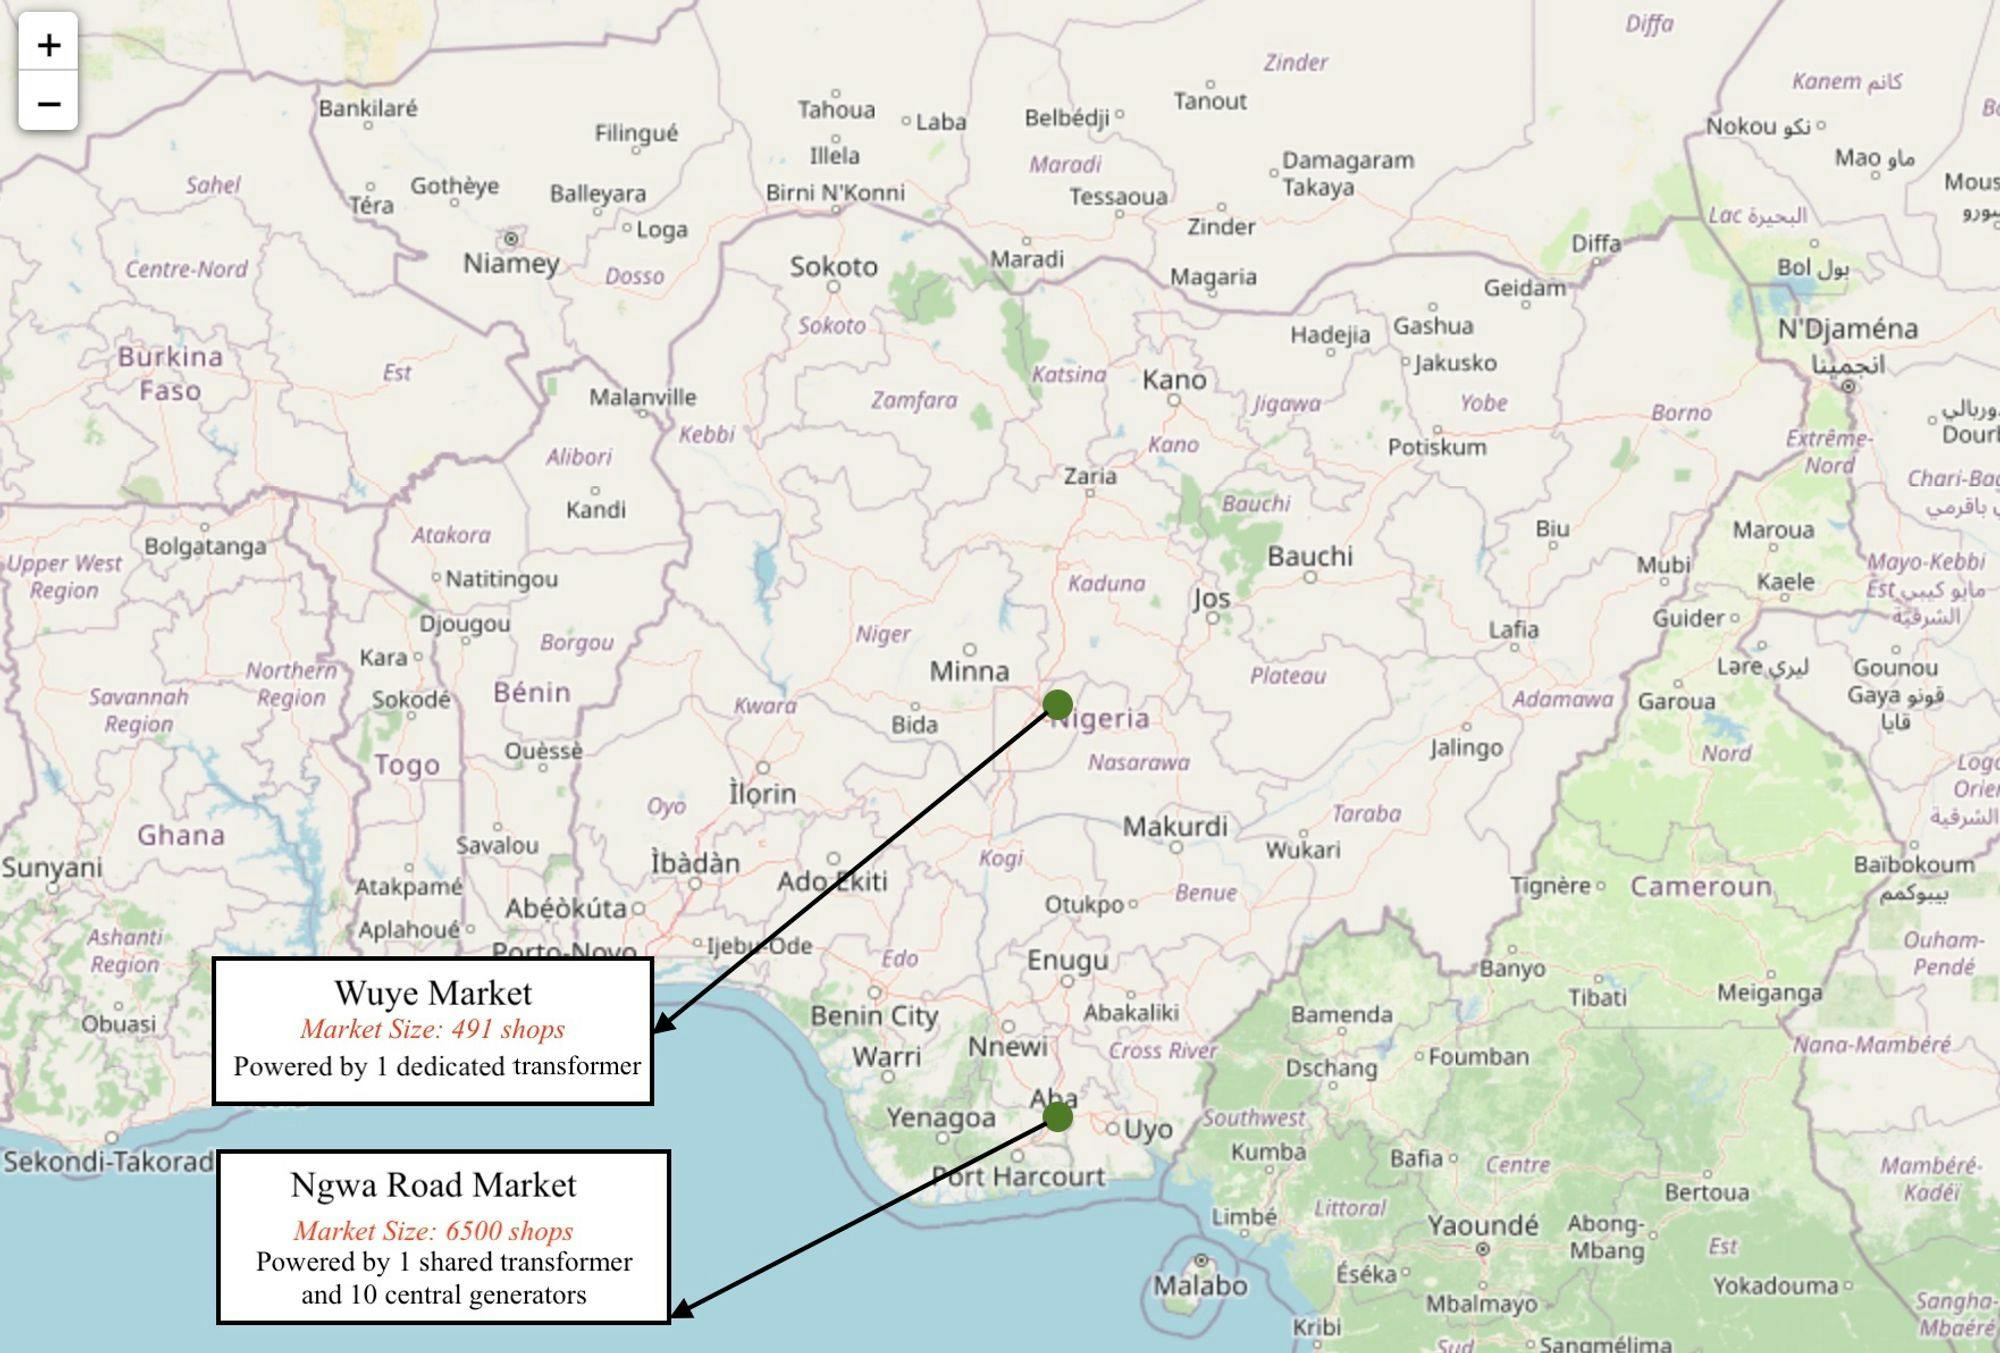 Figure 5: Geographical locations of Wuye and Ngwa Road markets in Nigeria. Wuye Market is located in Abuja, in the Federal Capital Territory, and Ngwa Road Market is located in Aba, in the southeast region of the country.